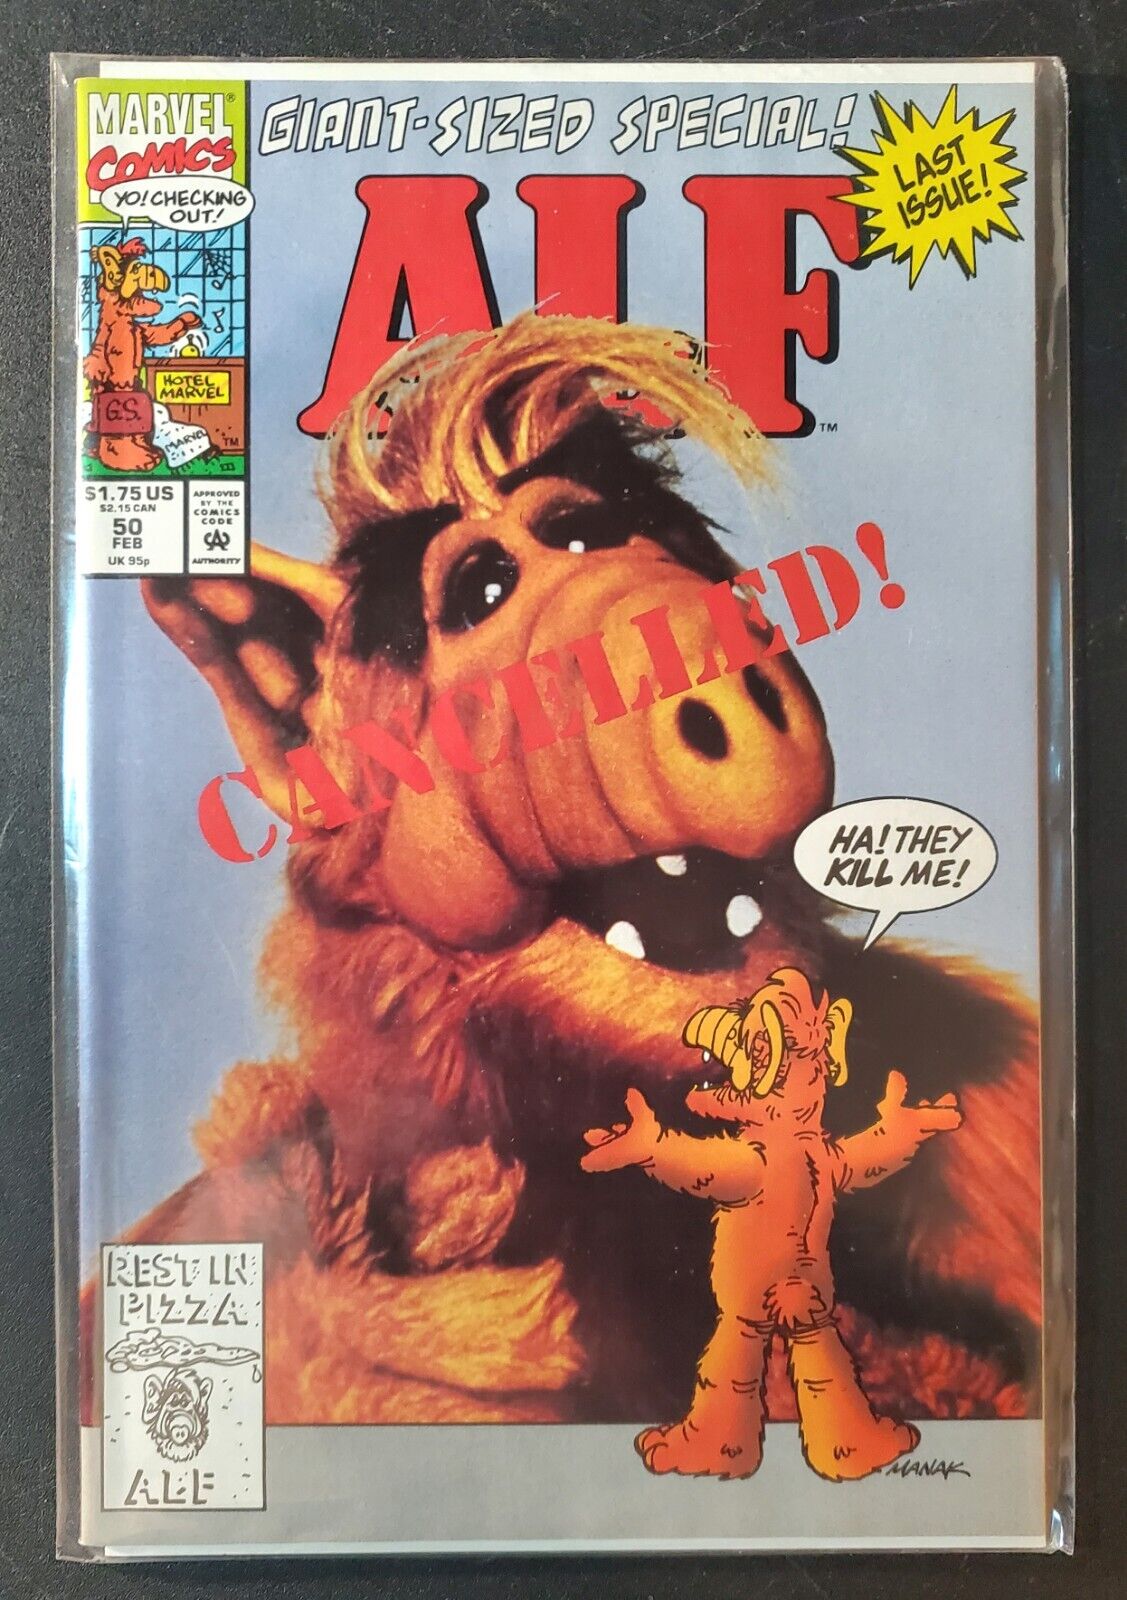 1992 ALF Cancelled Marvel Comic Book Feb 1992, Volume 1, #50 - The Last Issue